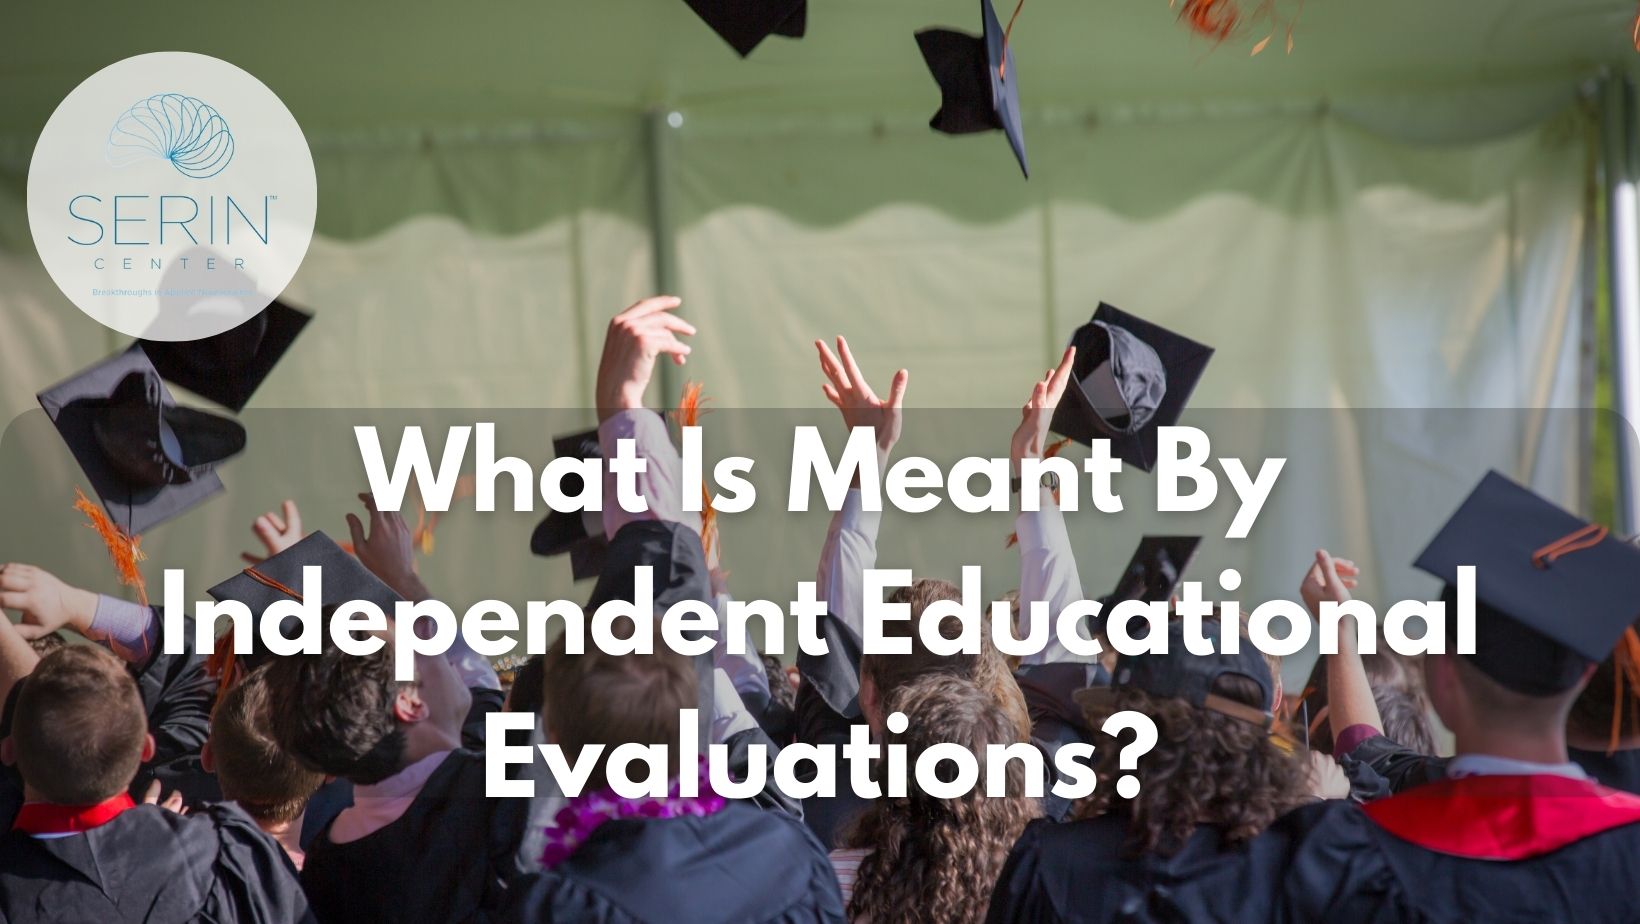 Independent Educational Evaluations - Serin Center